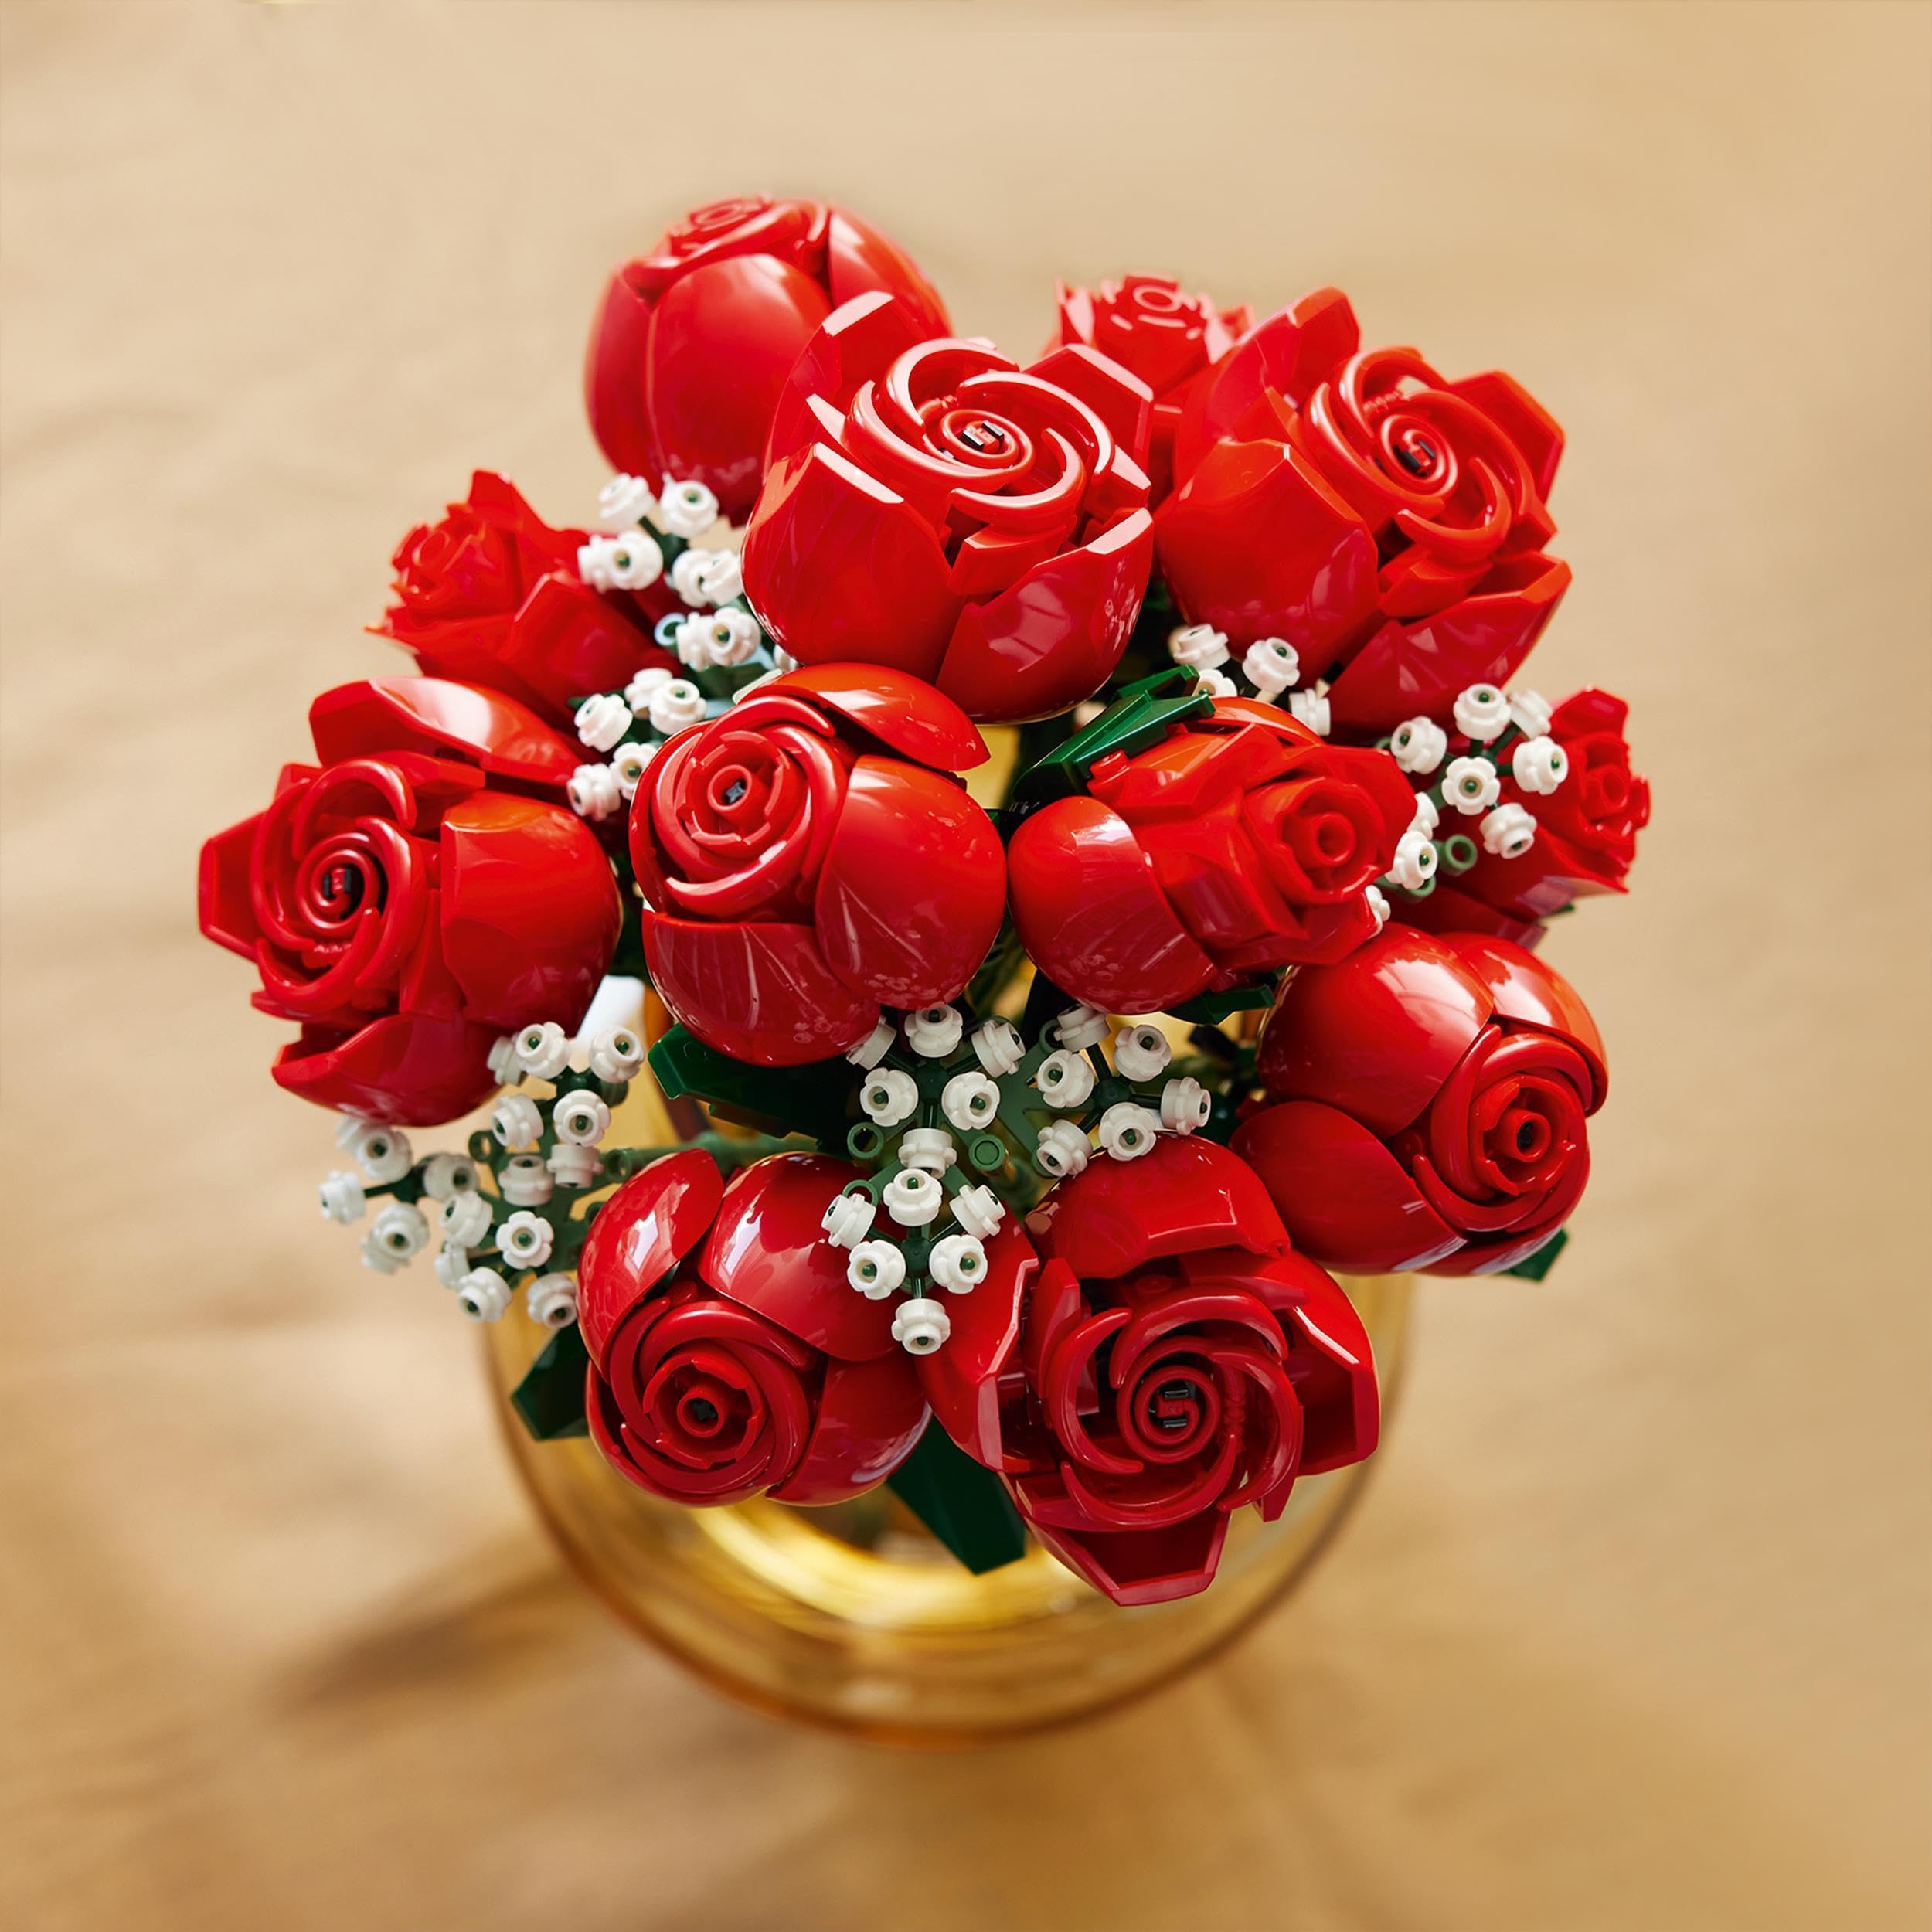 LEGO Icons Bouquet of Roses, Artificial Flowers Set for Adults, Botanical Collection, Home Décor Accessories, Valentine’s Day Treat, Gifts for Women, Men, Her or Him, Relaxing Activities 10328